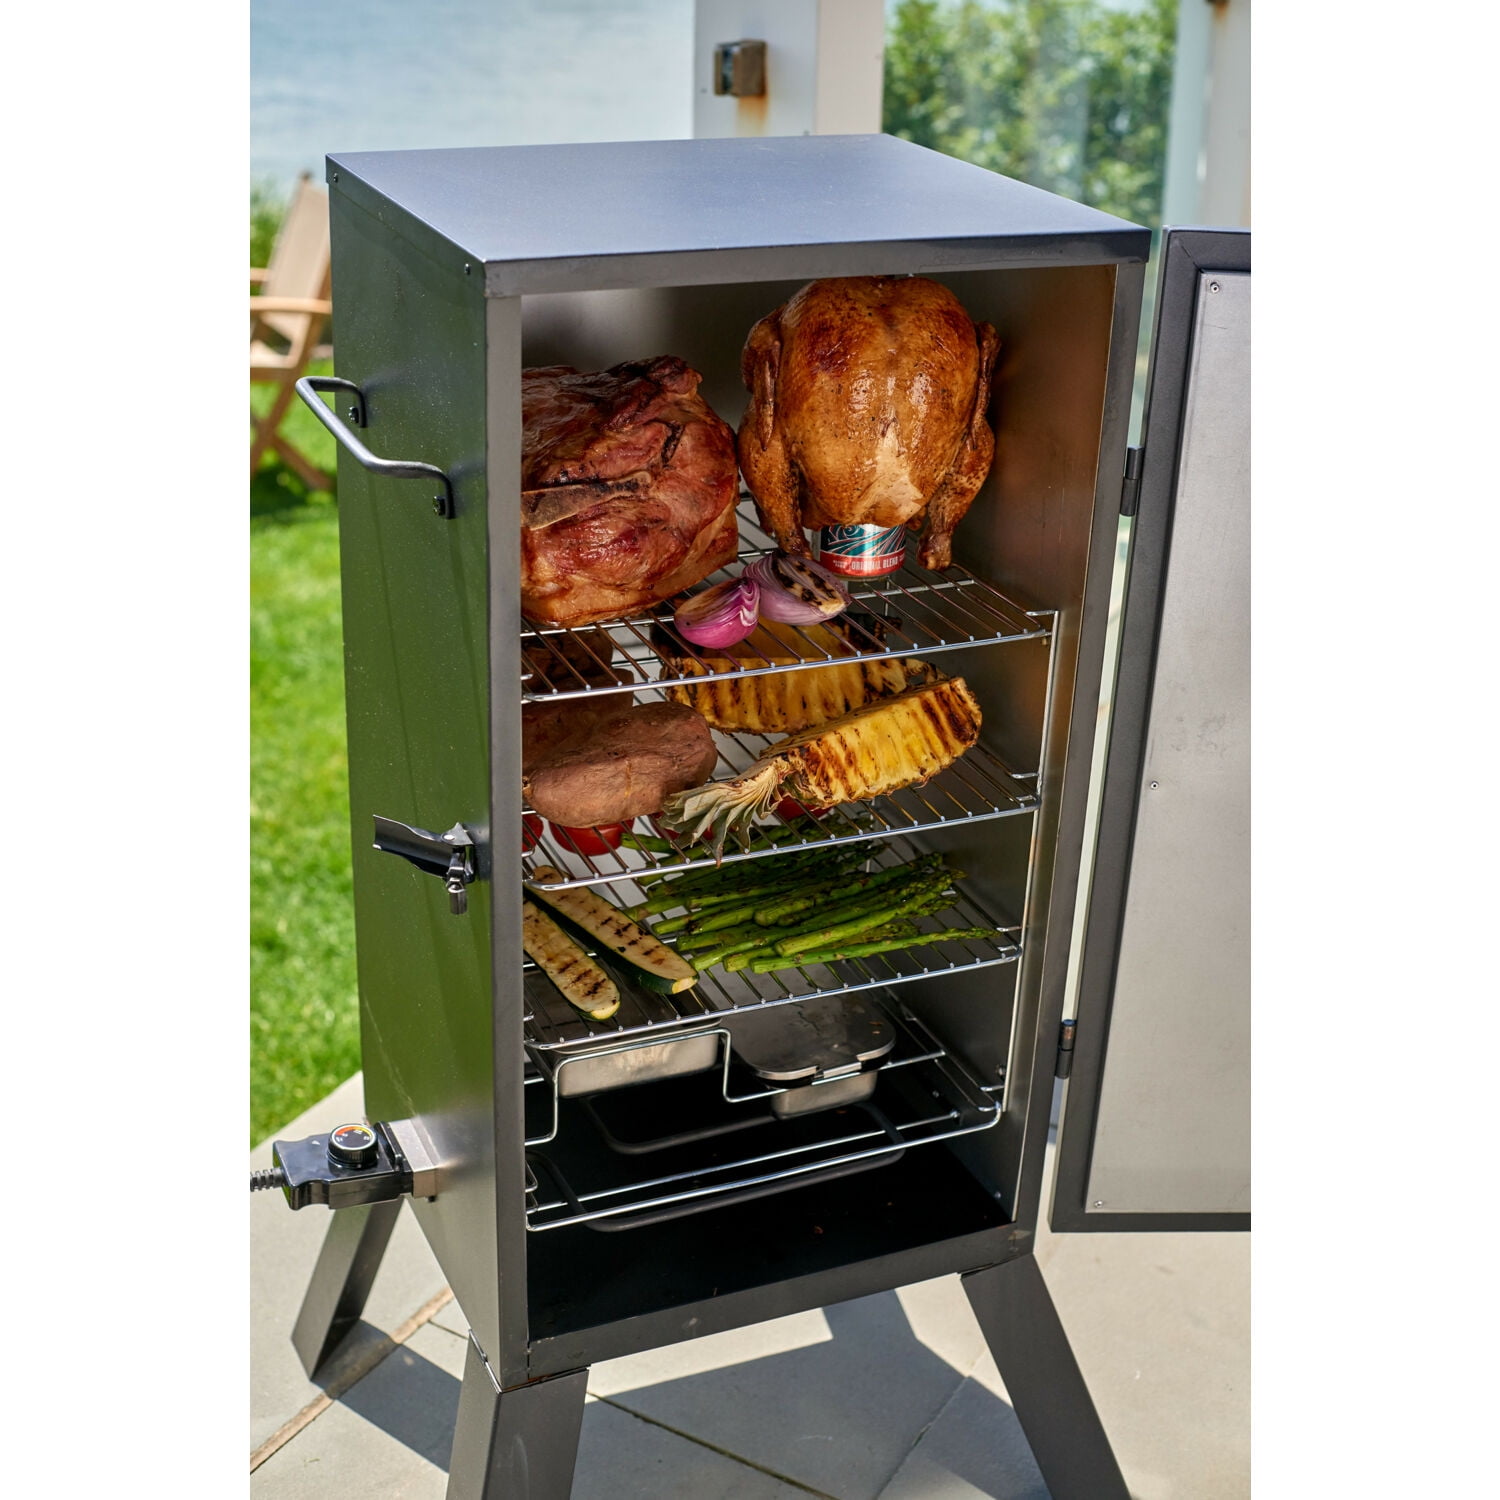 Cusinart COS-330 Electric Smoker Review - Smoked BBQ Source